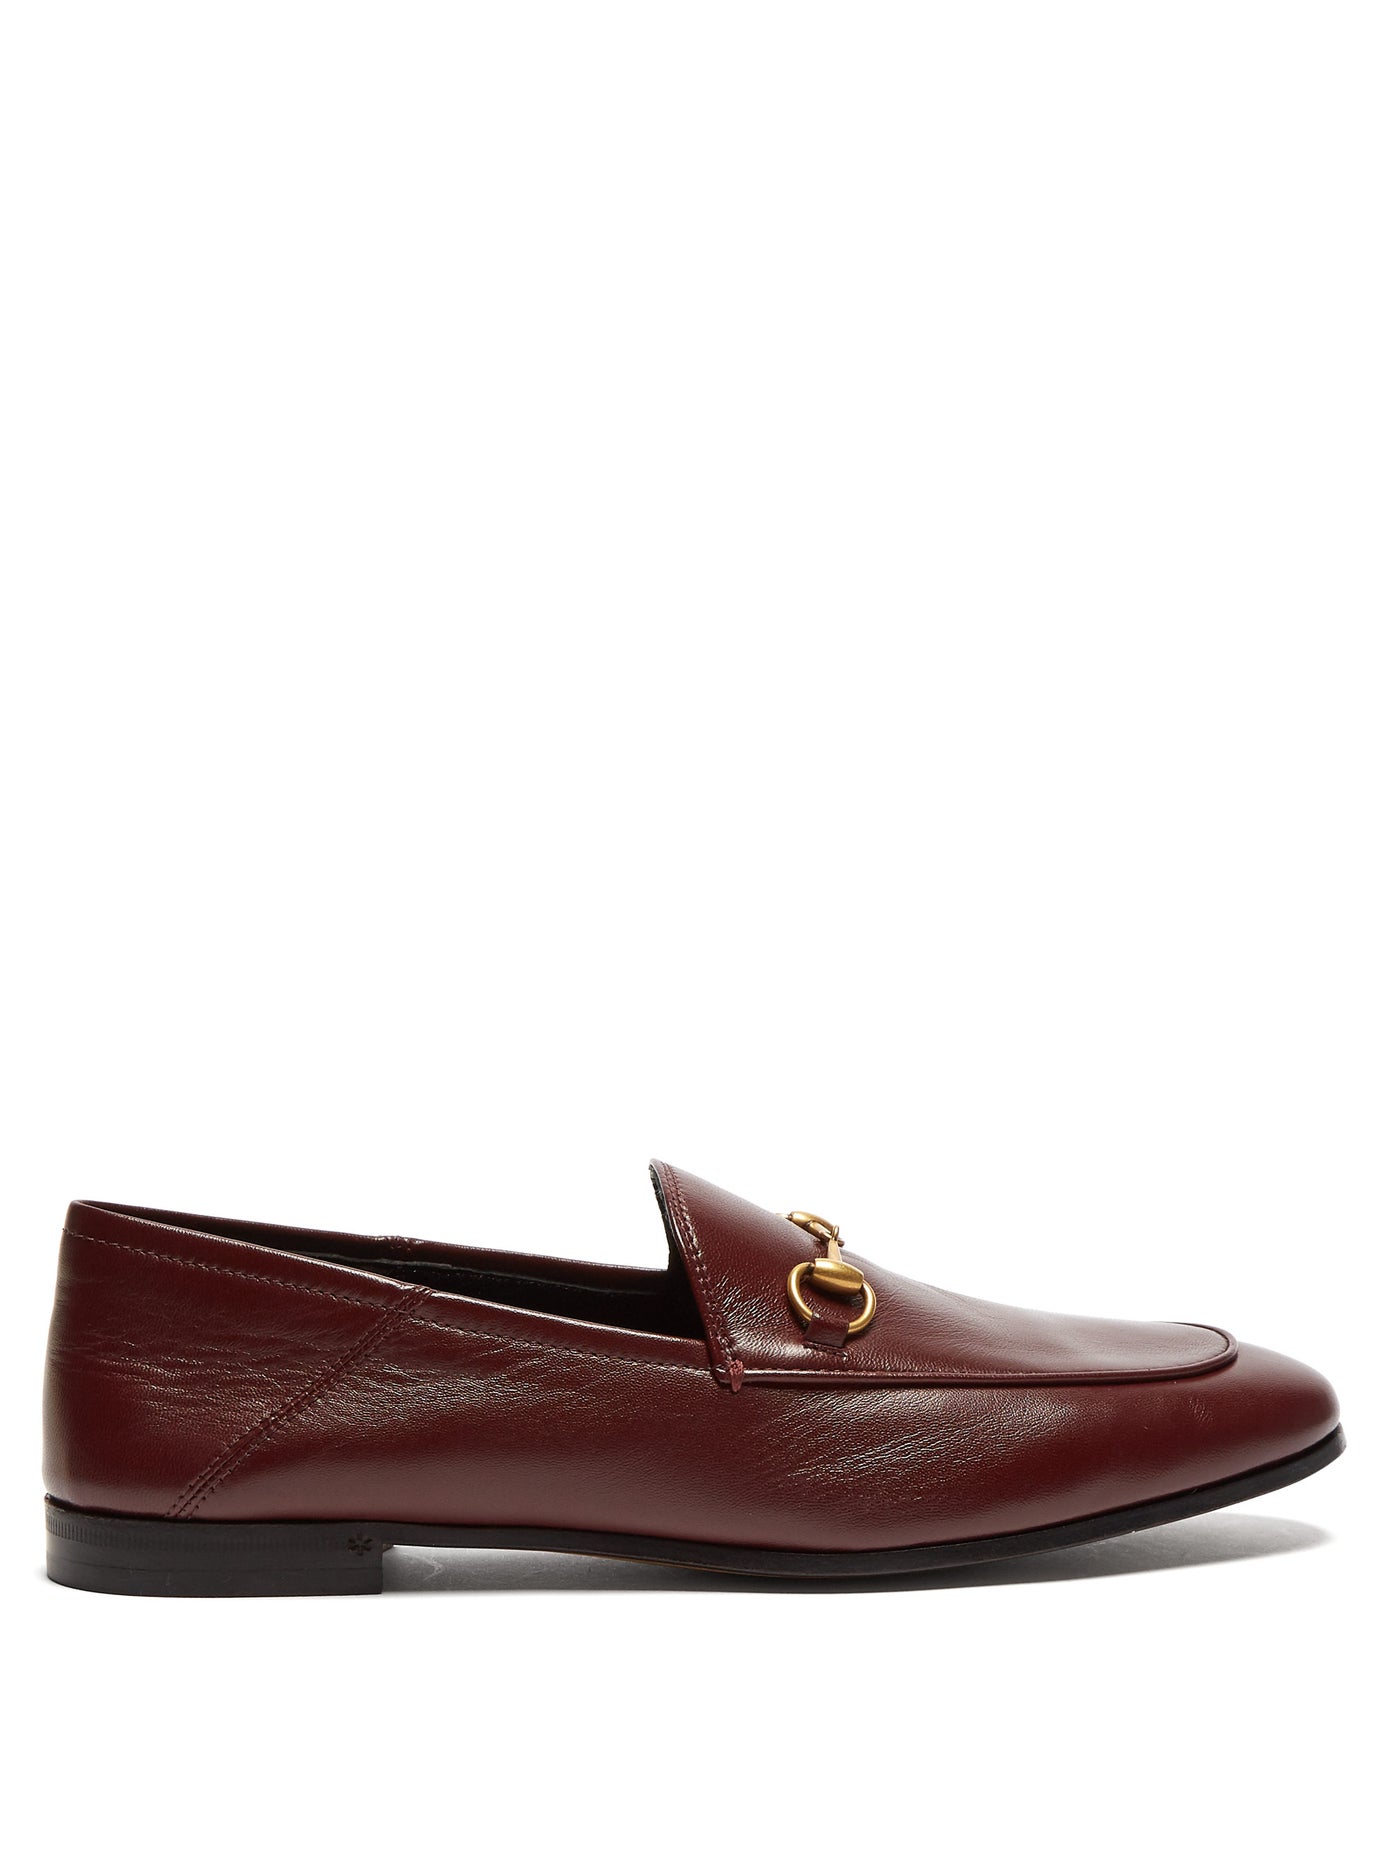 Gucci - Brixton Collapsible-Heel Leather Loafers | ABOUT ICONS